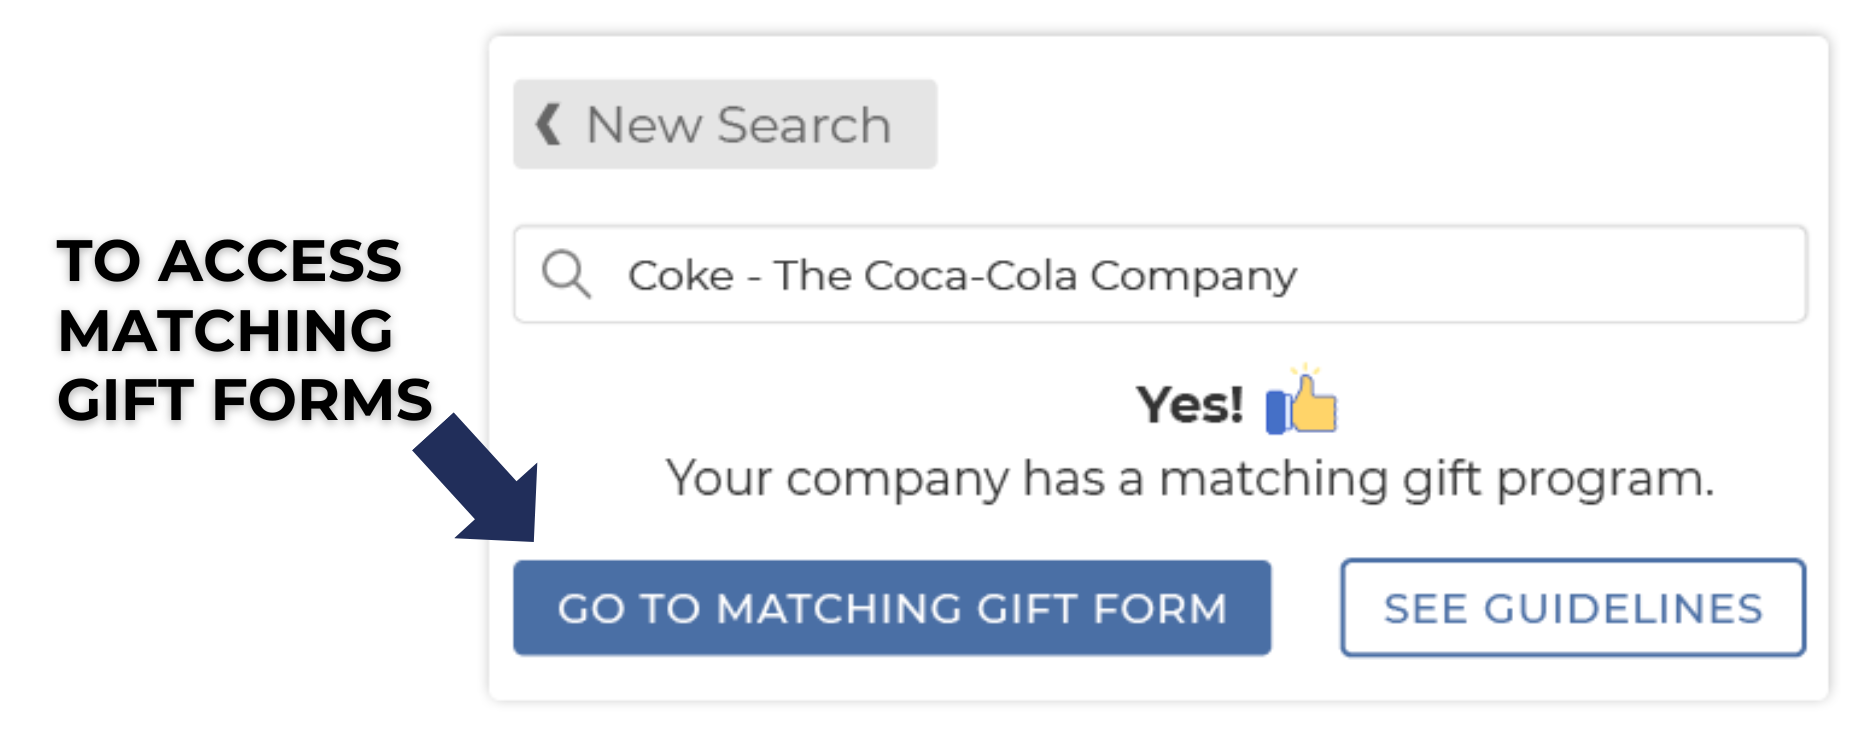 An example of a matching gift database that provides direct access to relevant matching gift forms when a company is selected. 